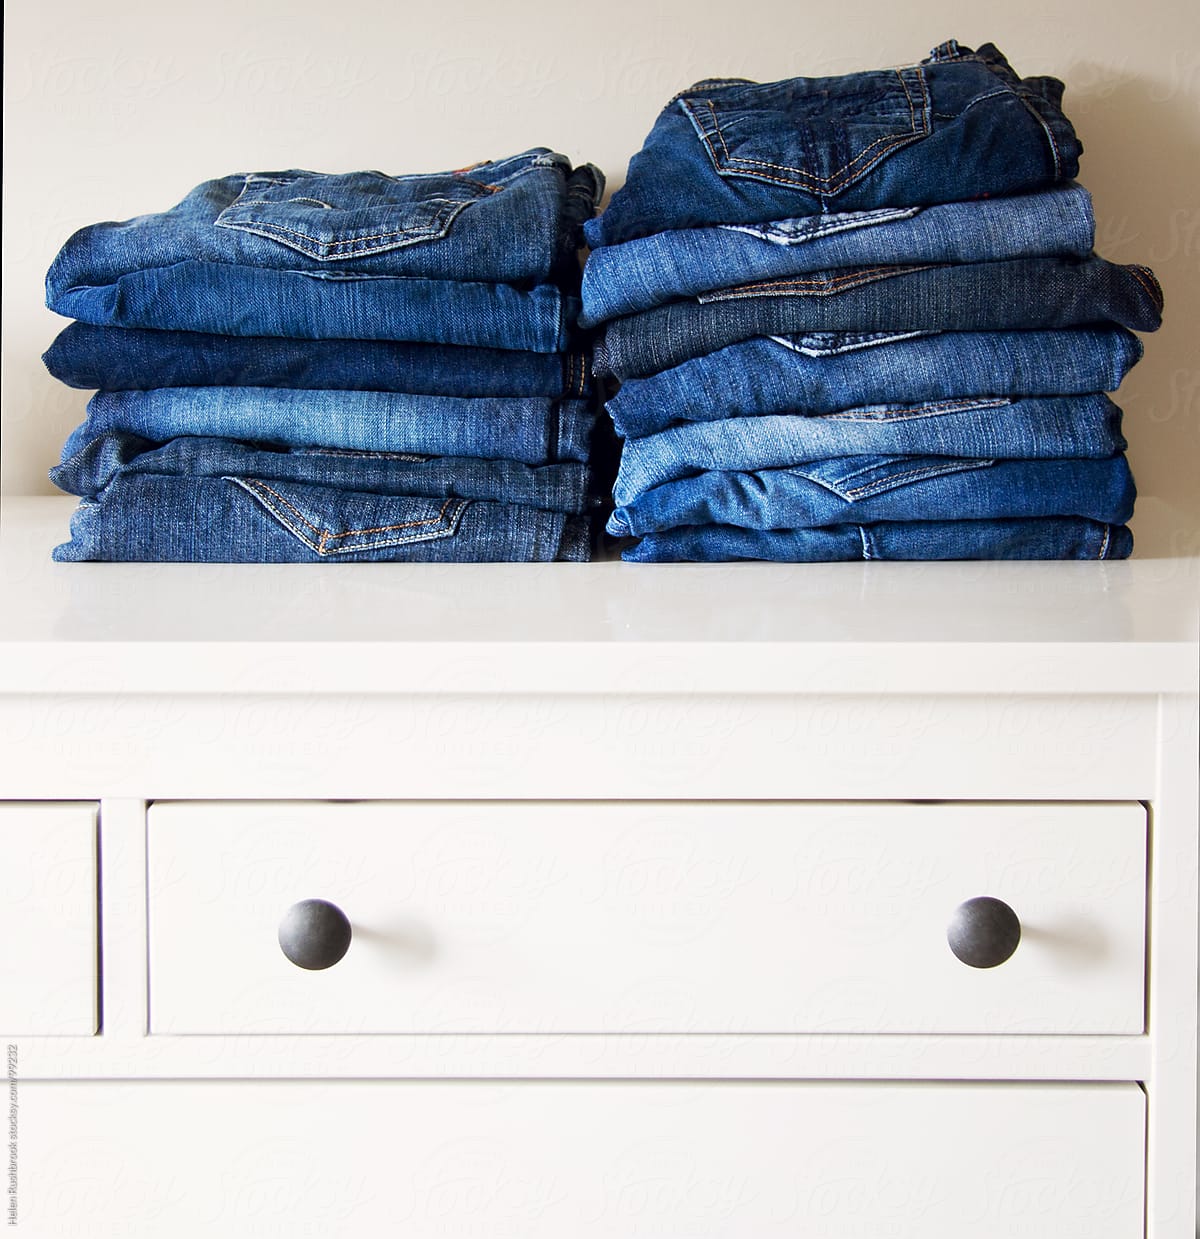 Jeans stacked on a dresser